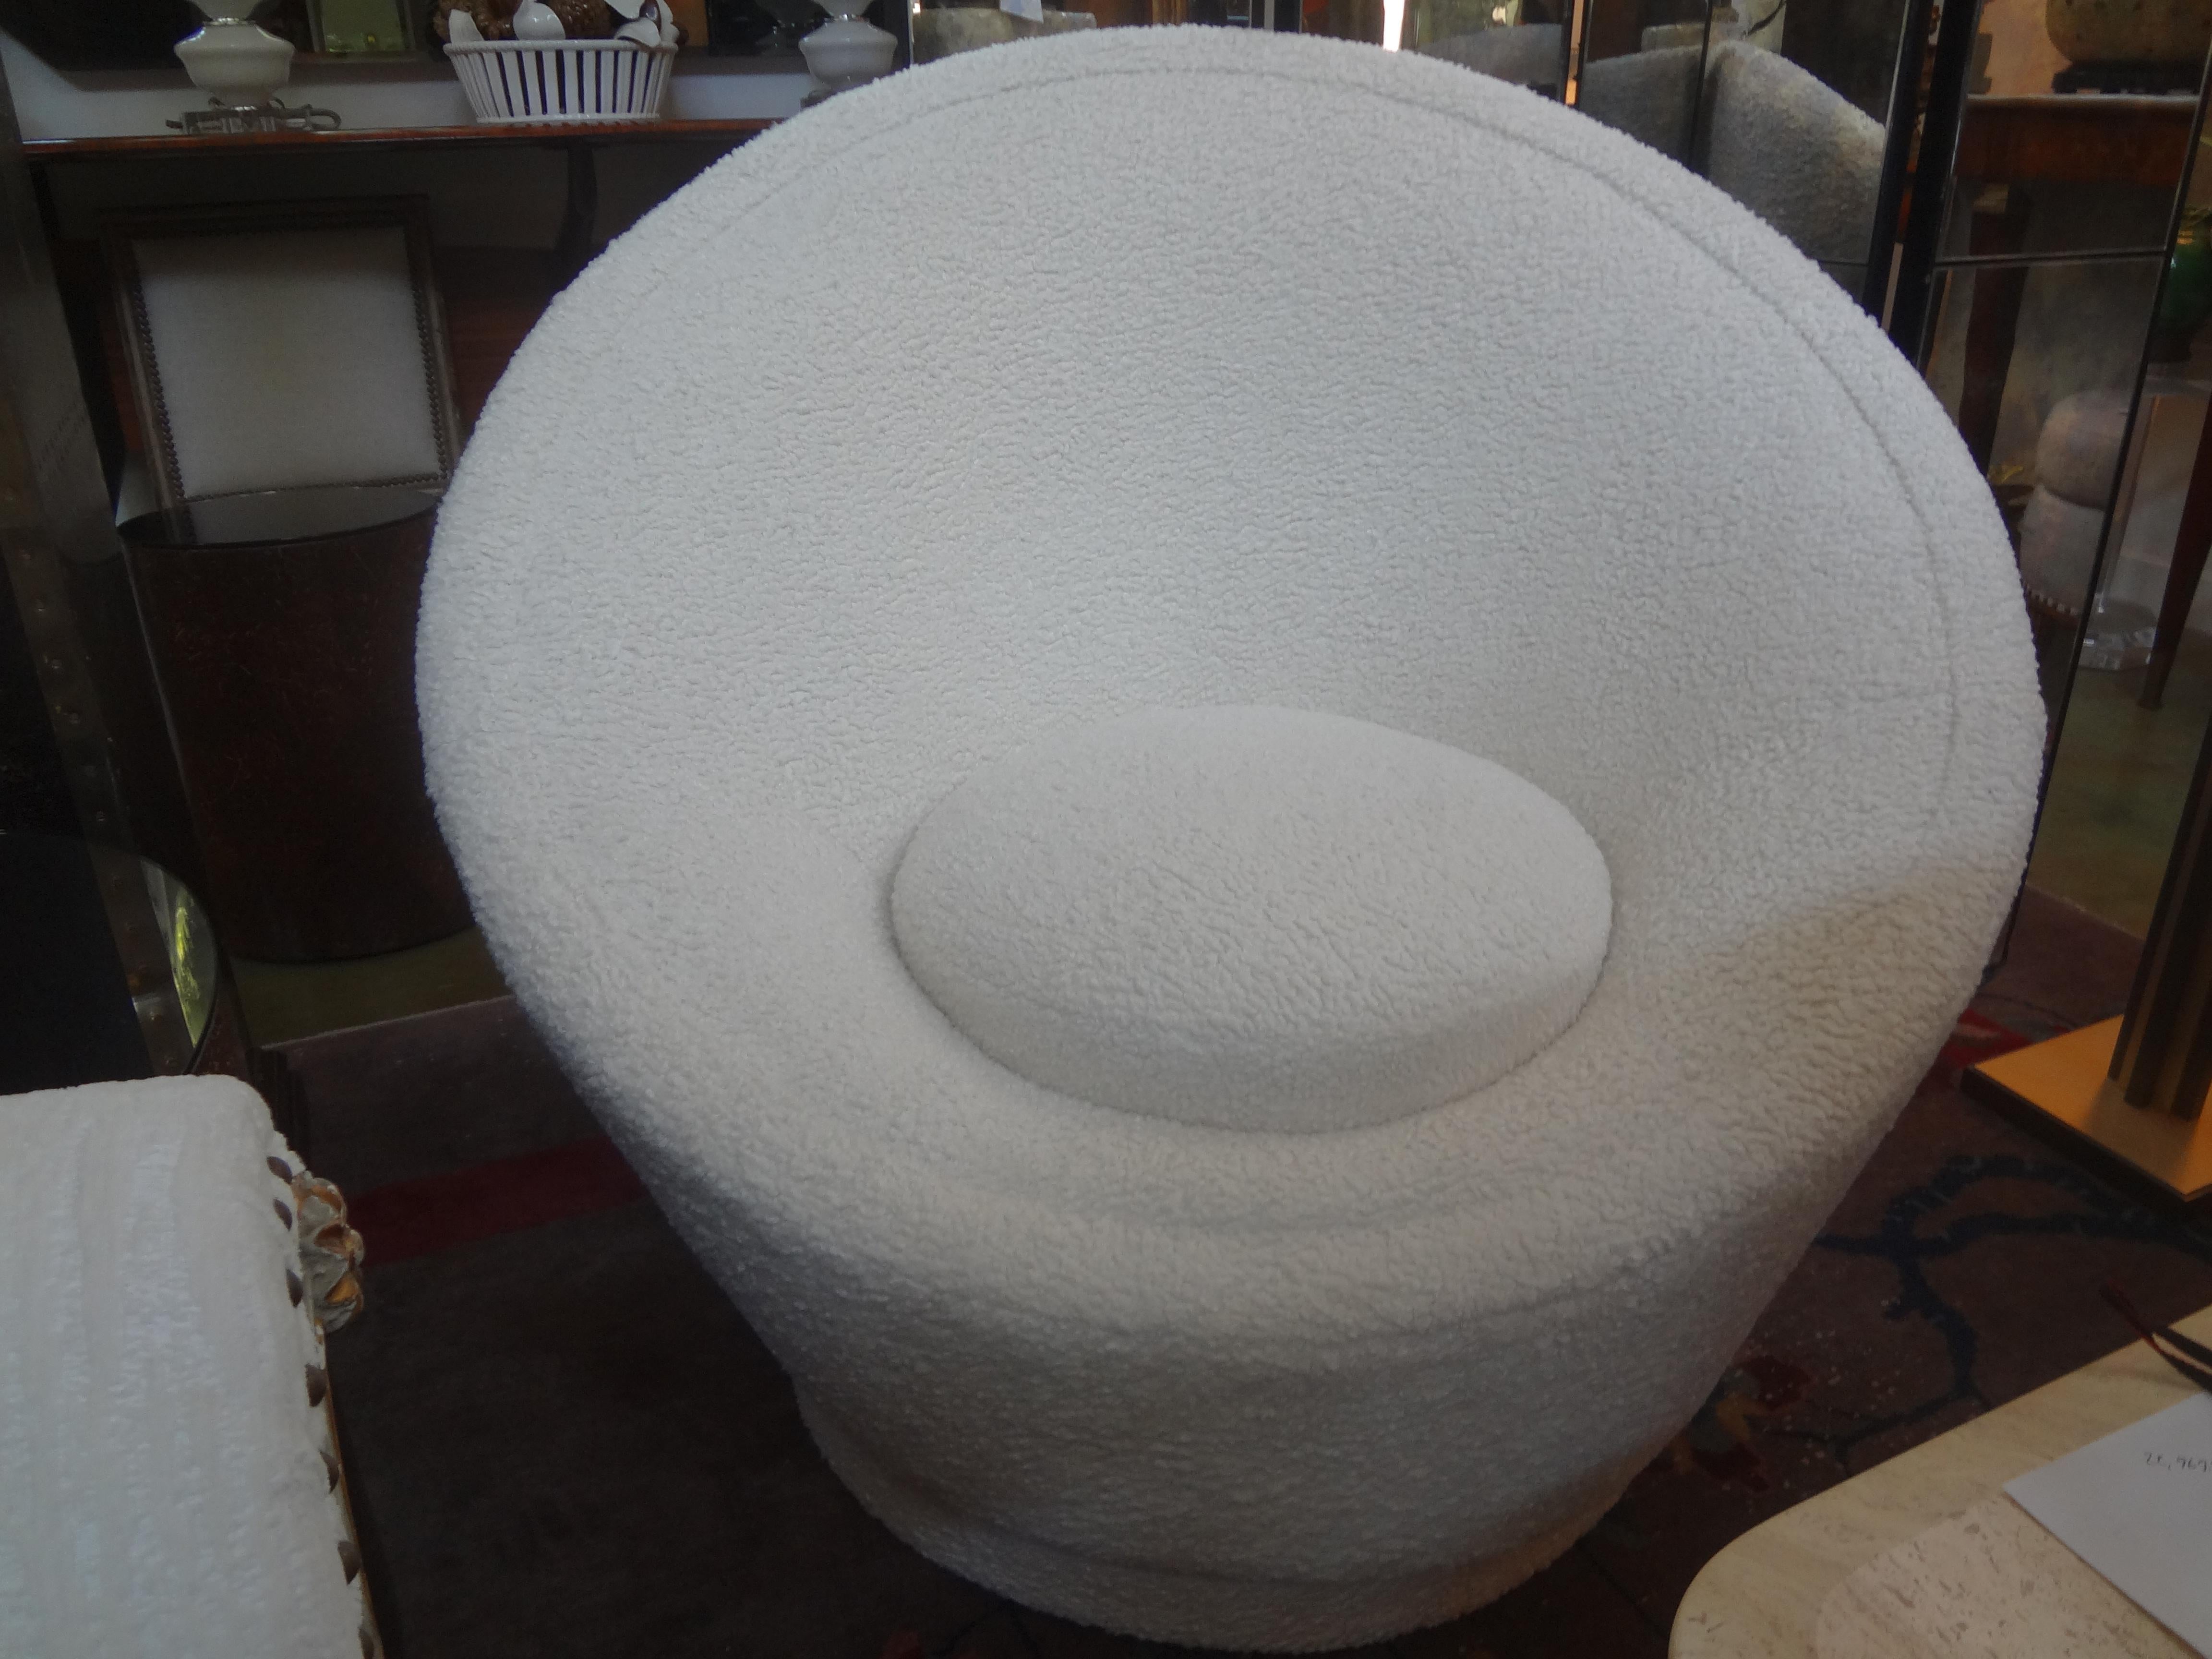 Iconic Pierre Paulin organic modern mushroom chair, by Artifort. This gorgeous sculptural swivel chair is extremely comfortable and stunning from every angle. This Classic lounge chair has been professionally upholstered in a white luxe plush nubby